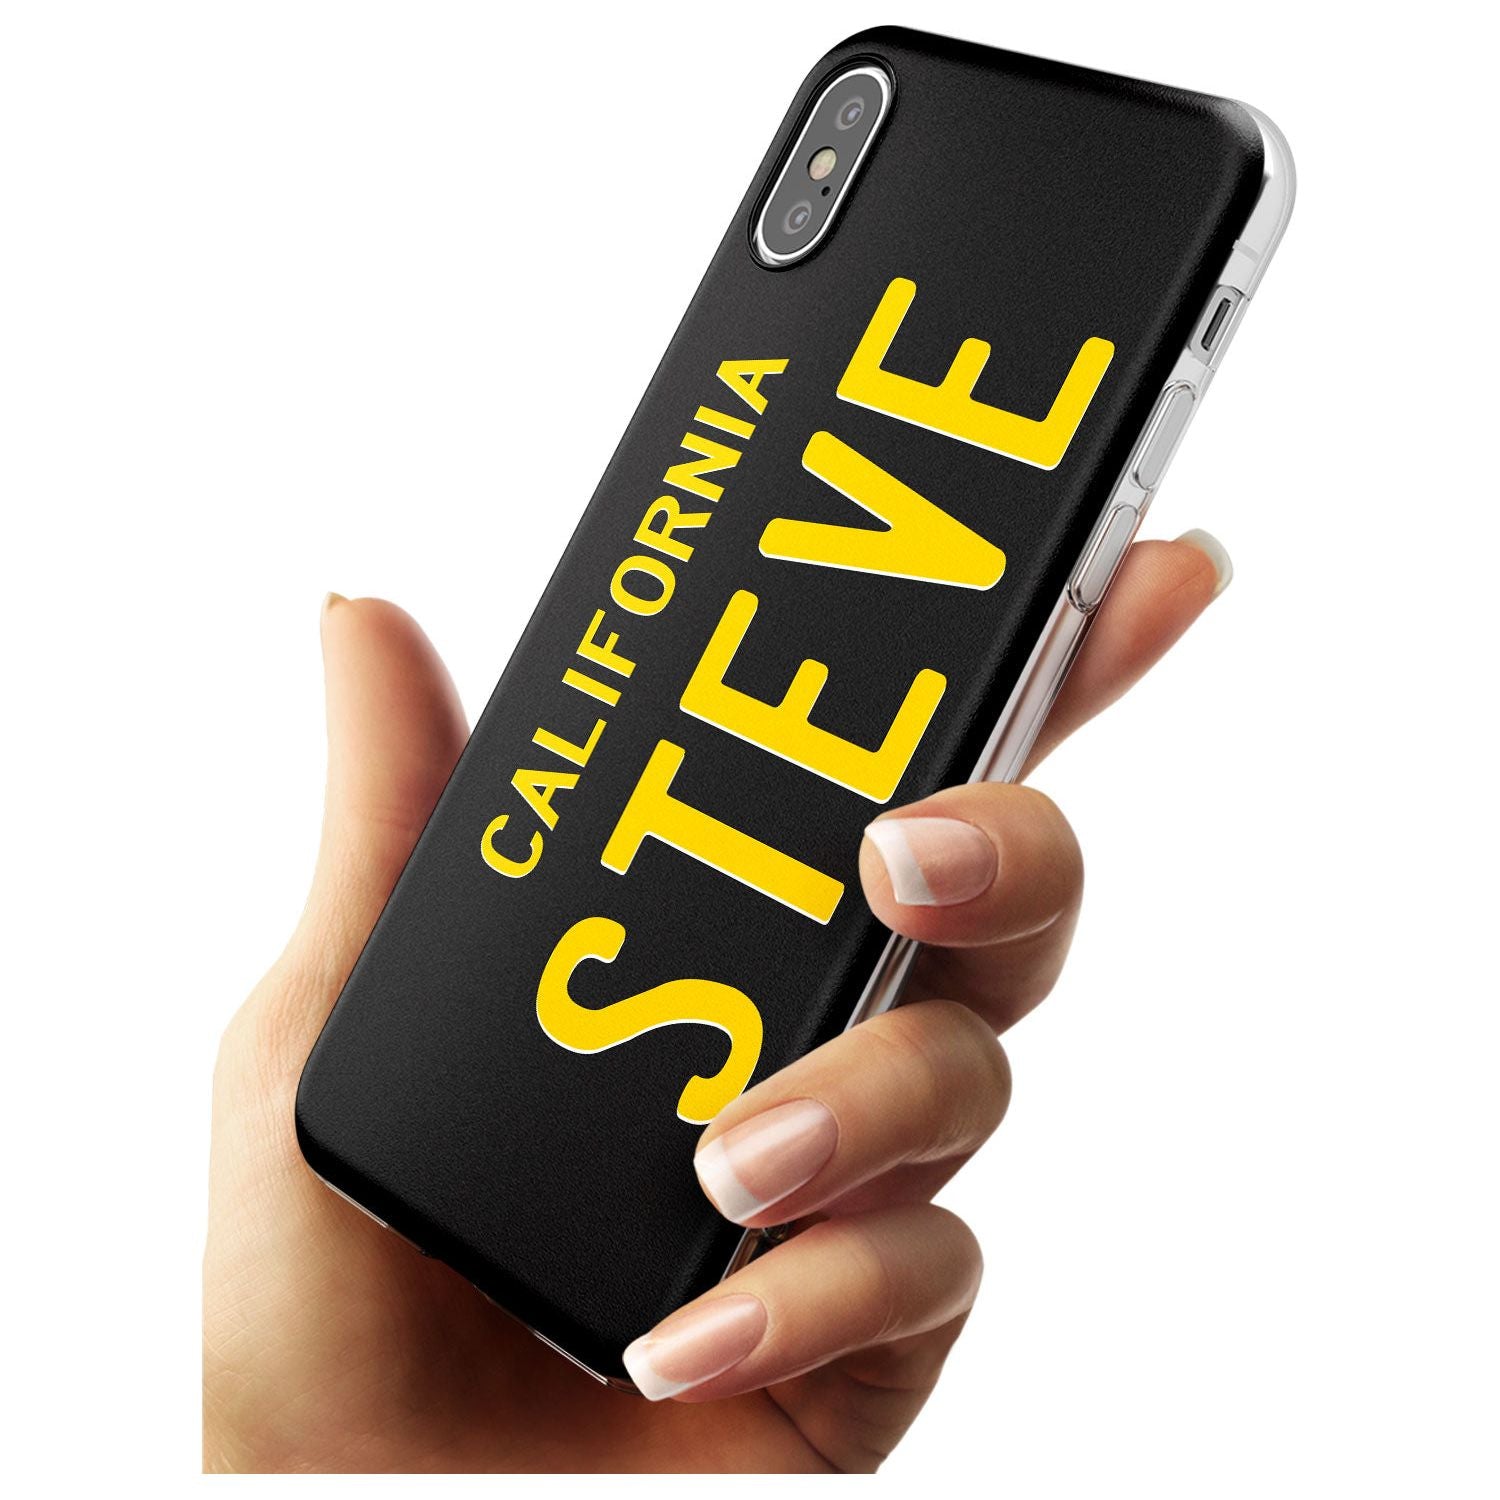 Vintage California License Plate Black Impact Phone Case for iPhone X XS Max XR